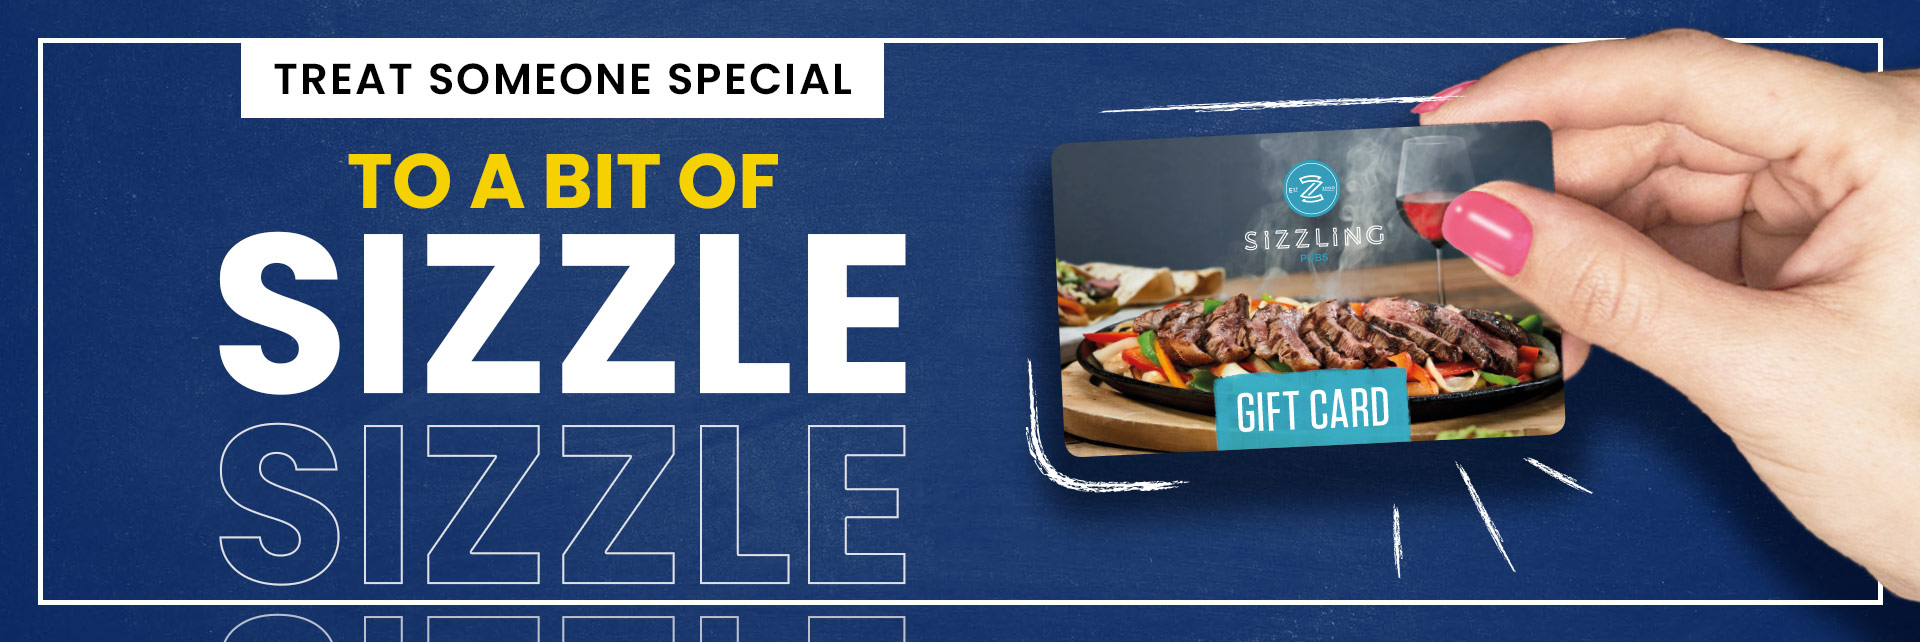 Sizzling Pubs Gift Card at The Hunting Lodge in Whitley Bay